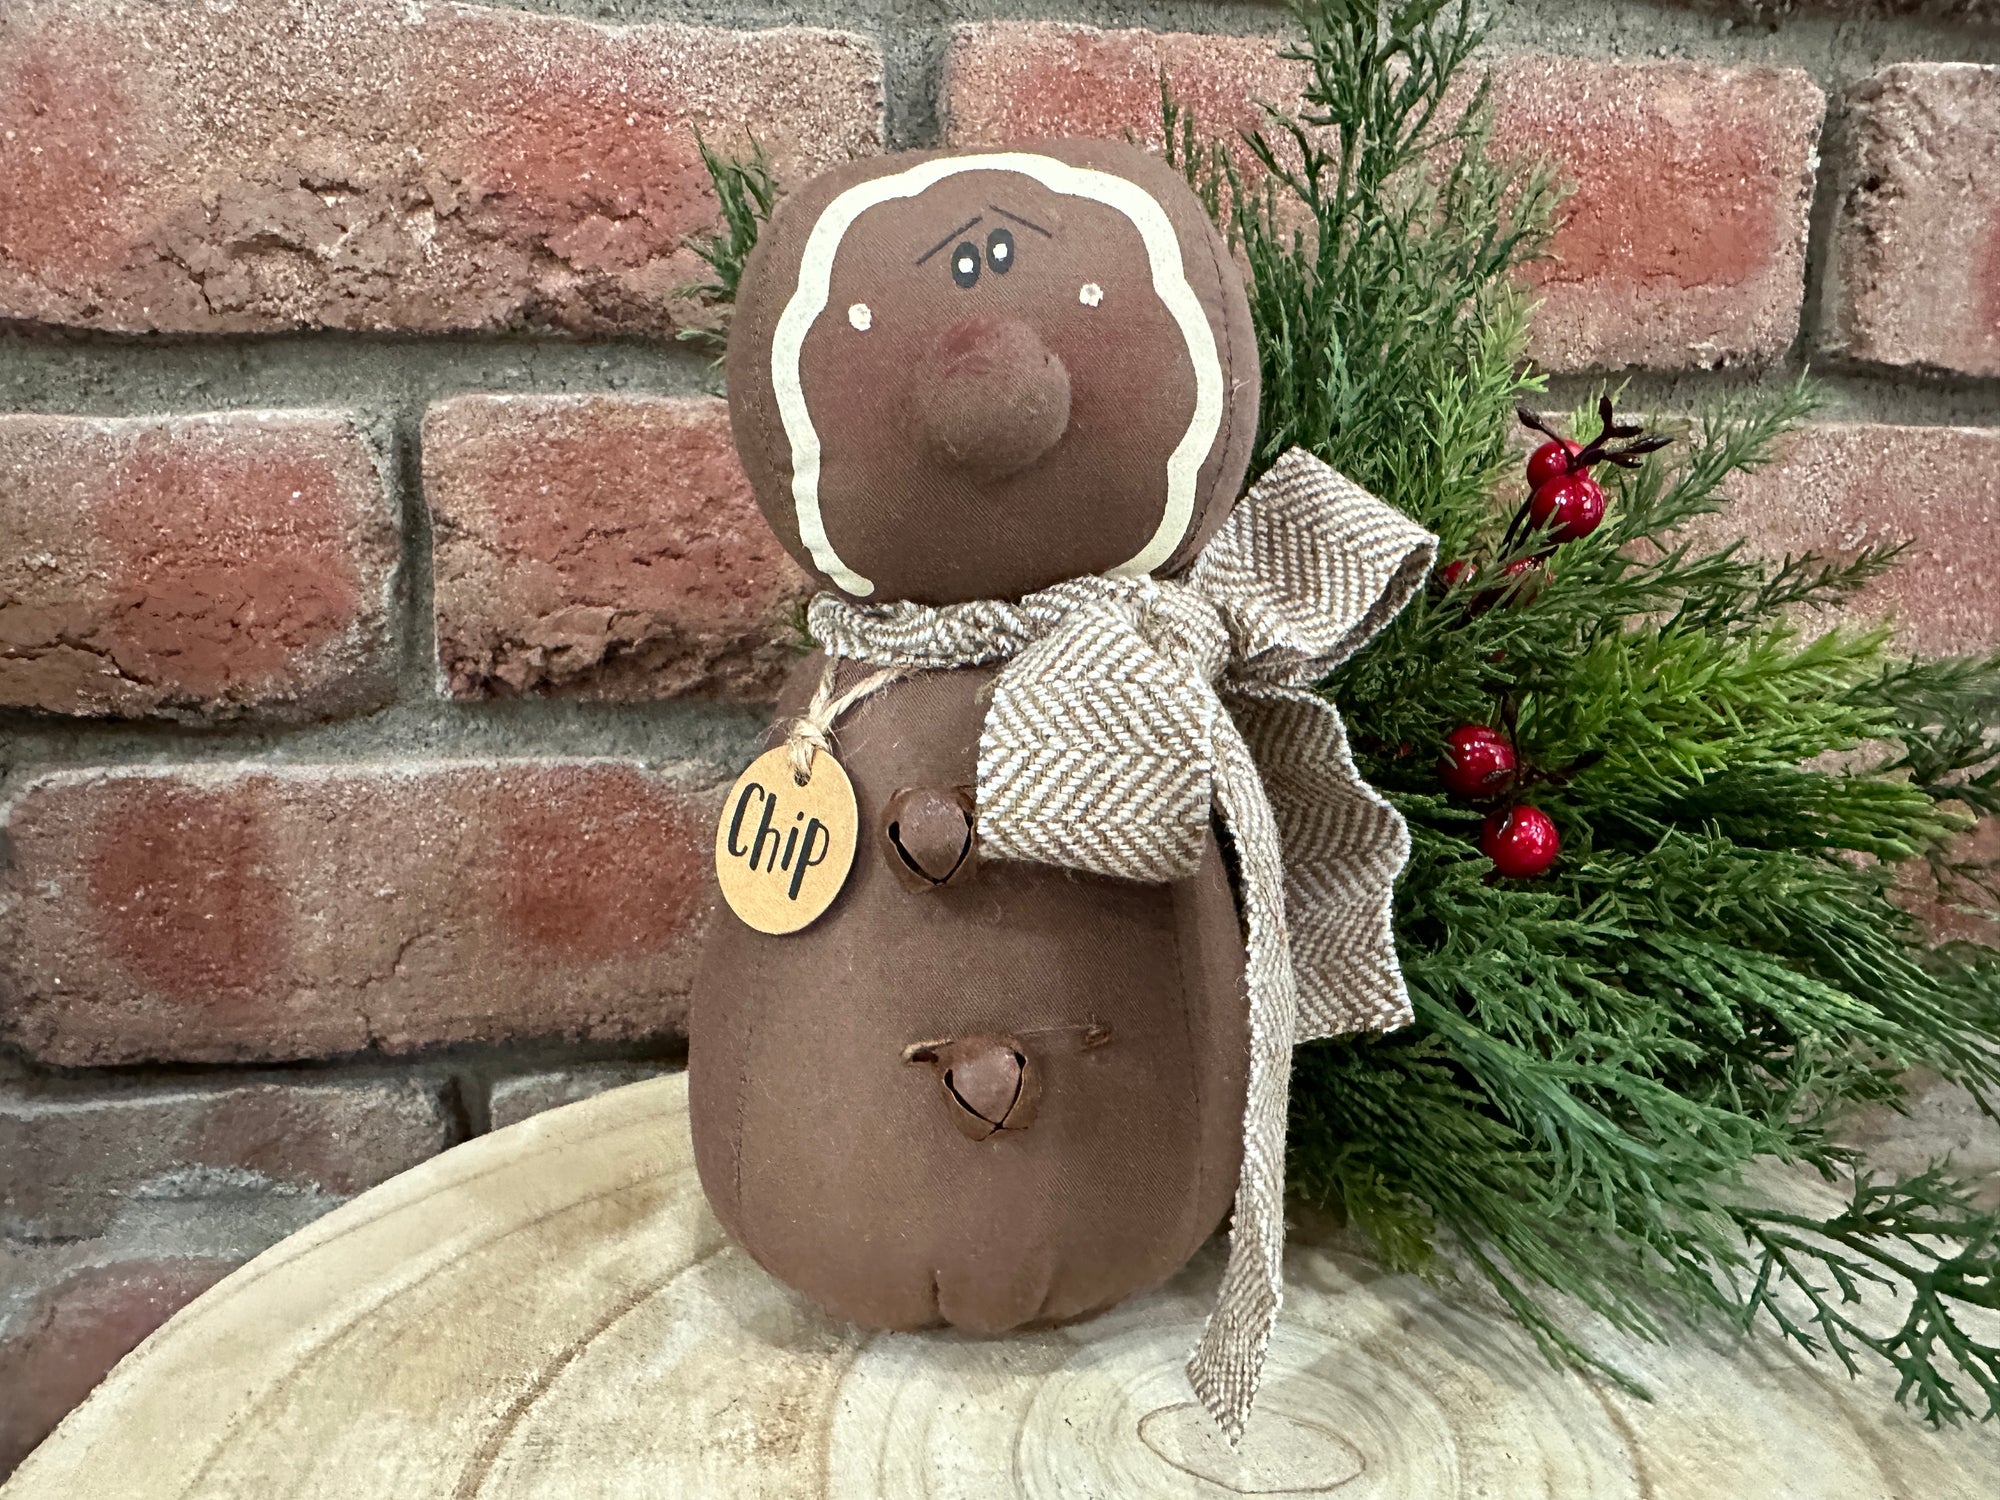 Chip the Gingerbread